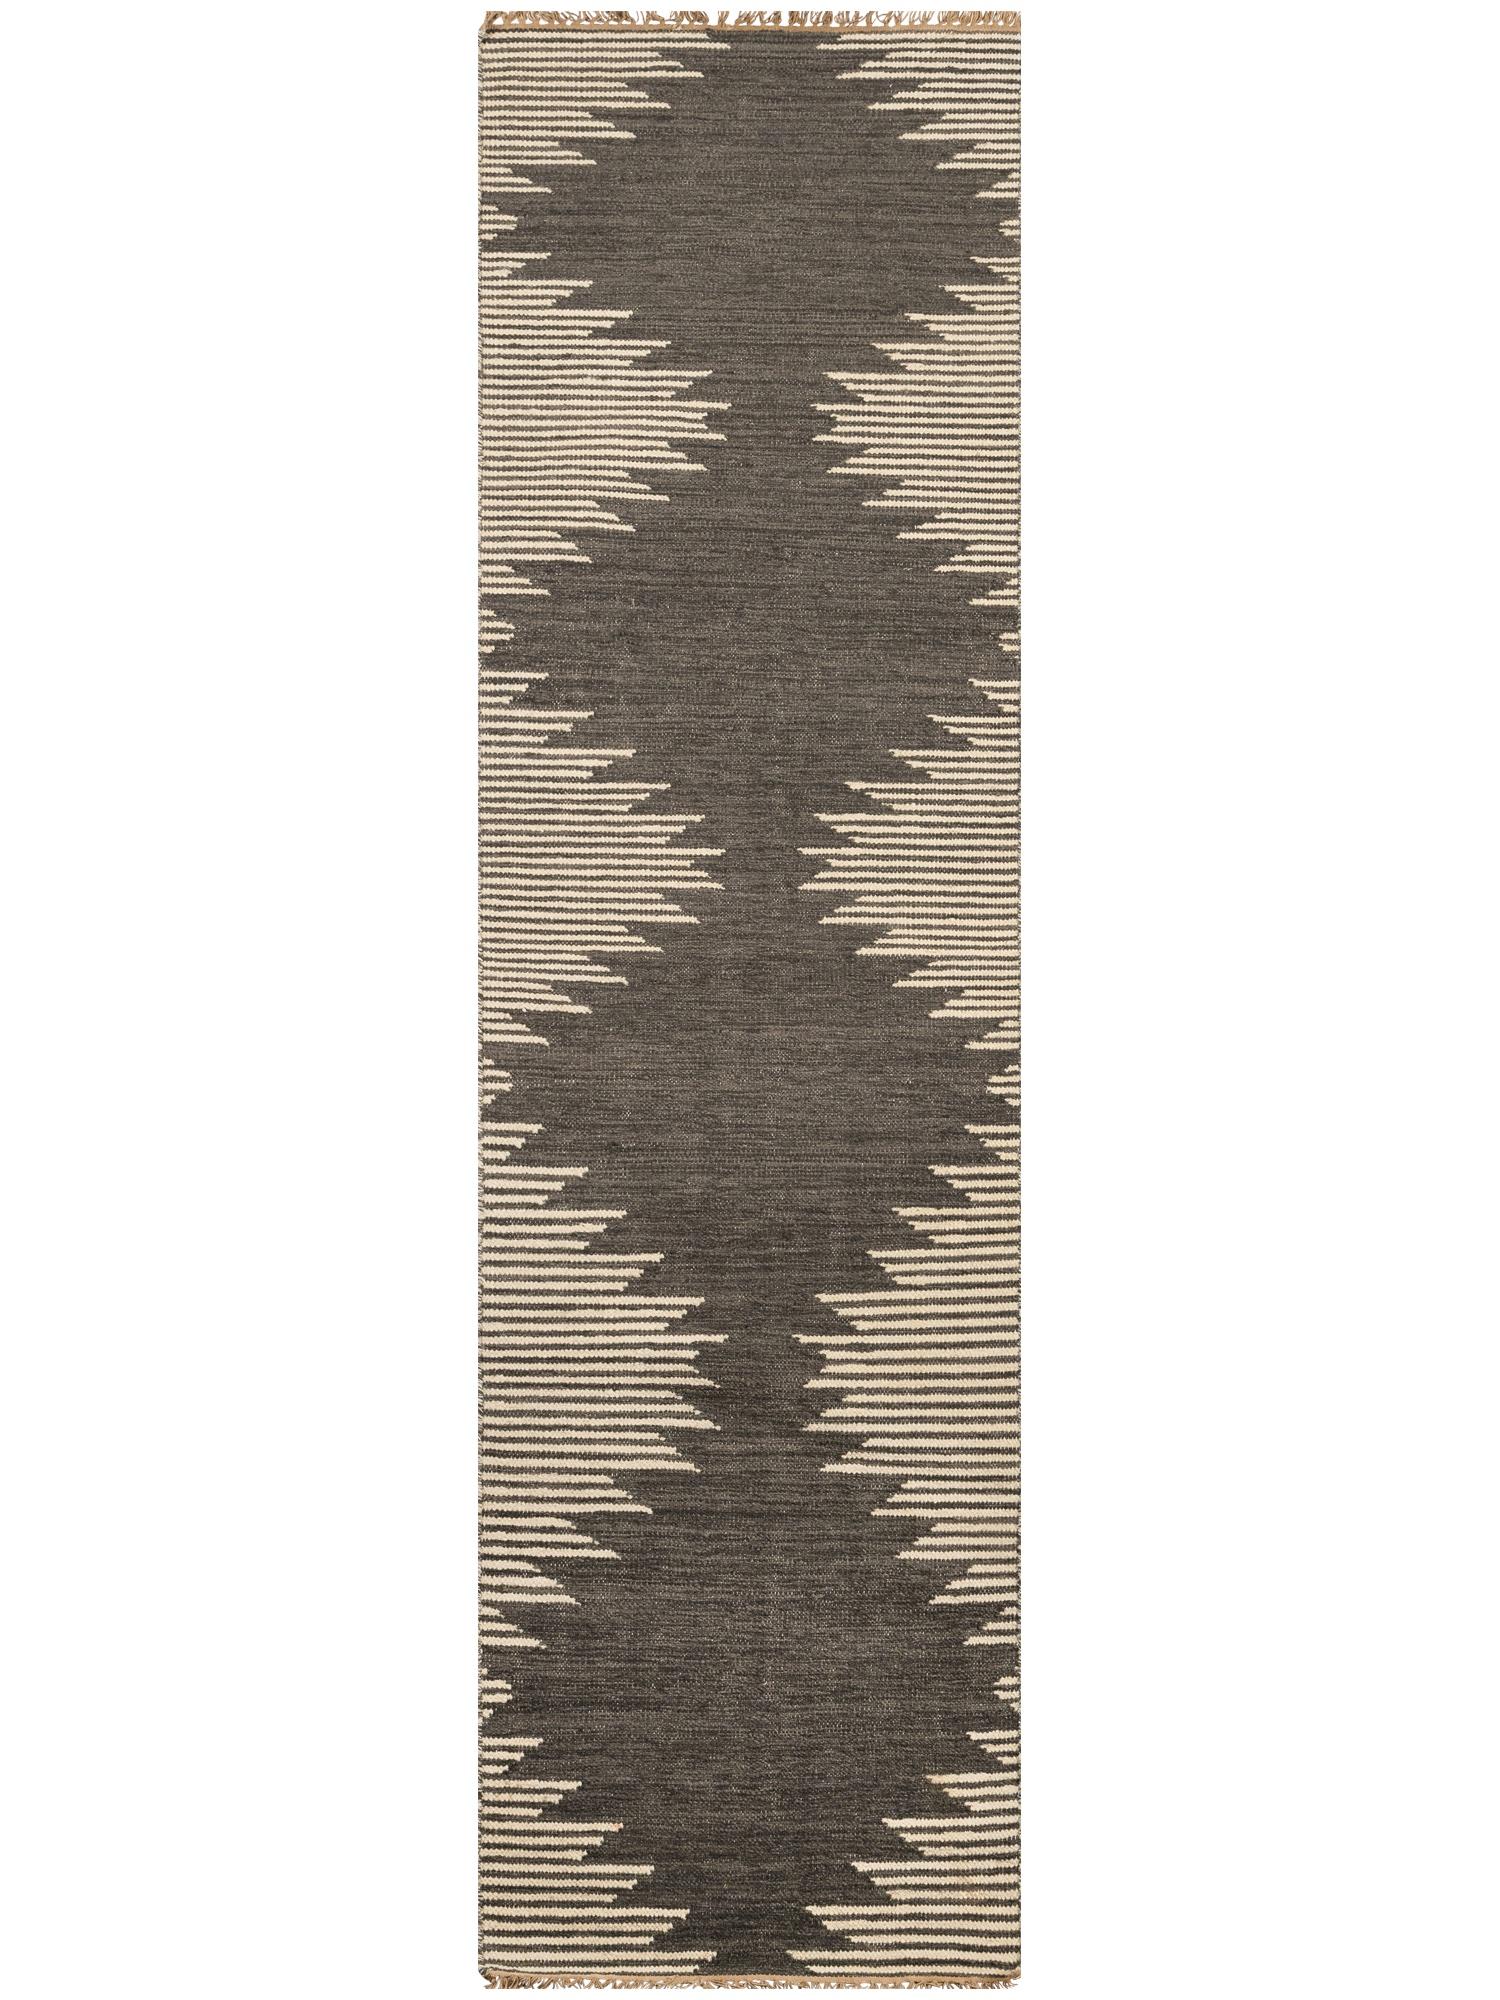 Contemporary “Metlili Missira” Bespoke, Handwoven Wool Rug 'Charcoal' by Christiane Lemieux For Sale